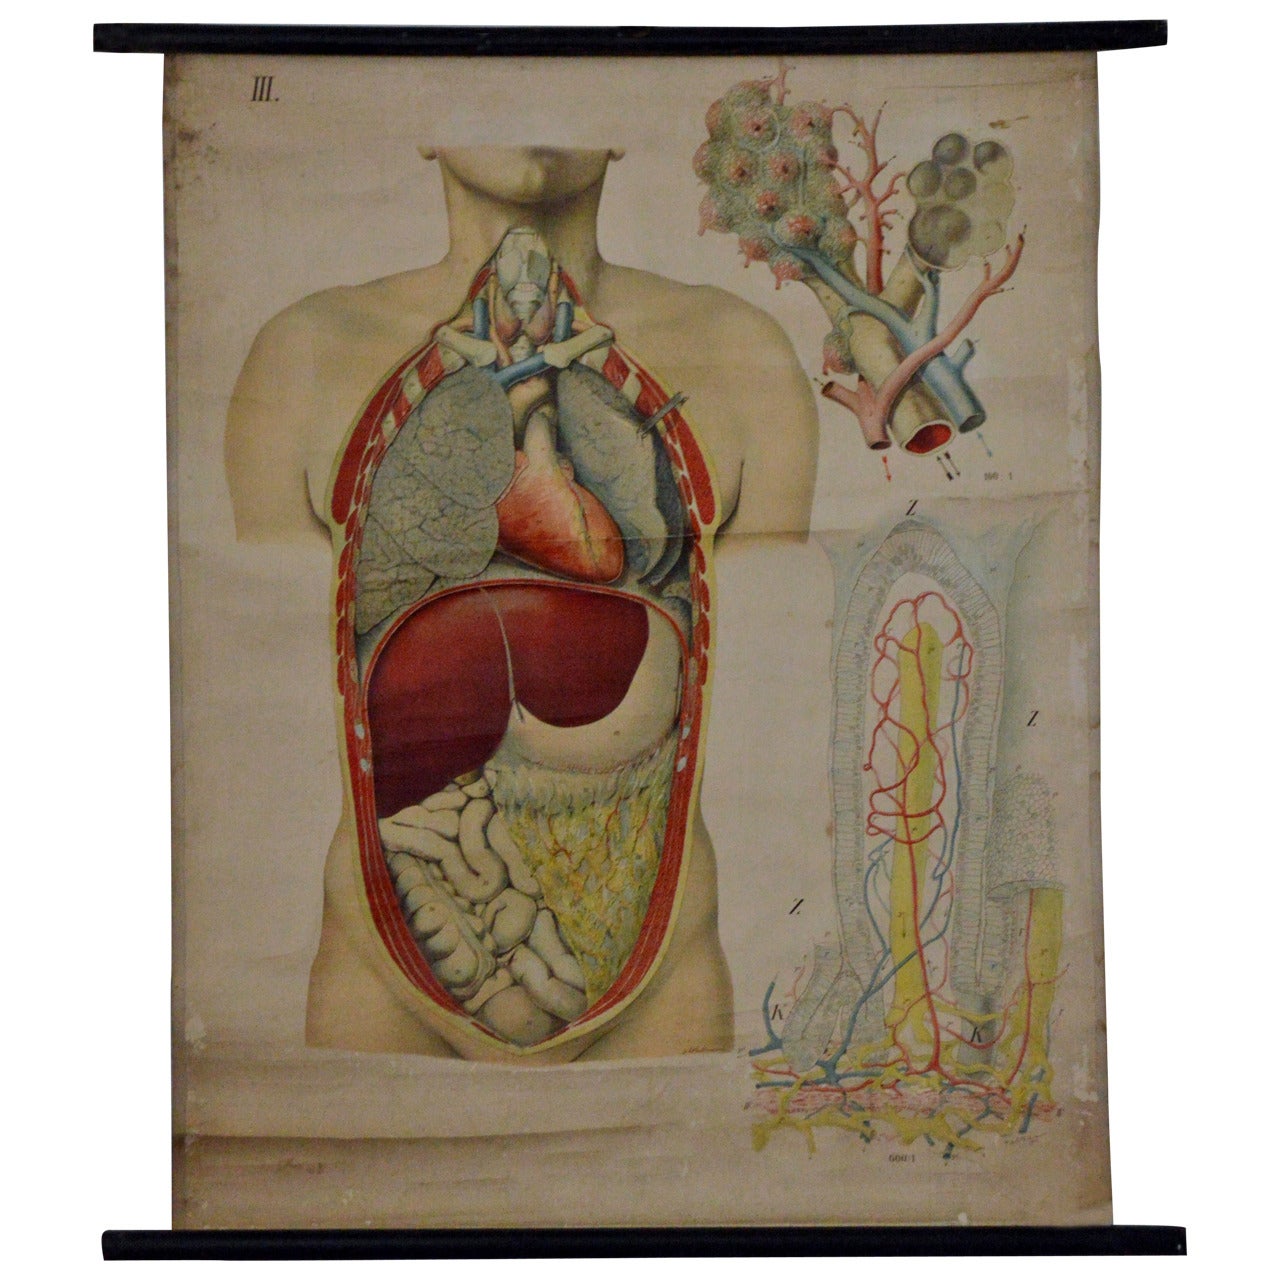 Antique Anatomical Chart Architecture of the Human Anatomy by E. Hoelemann